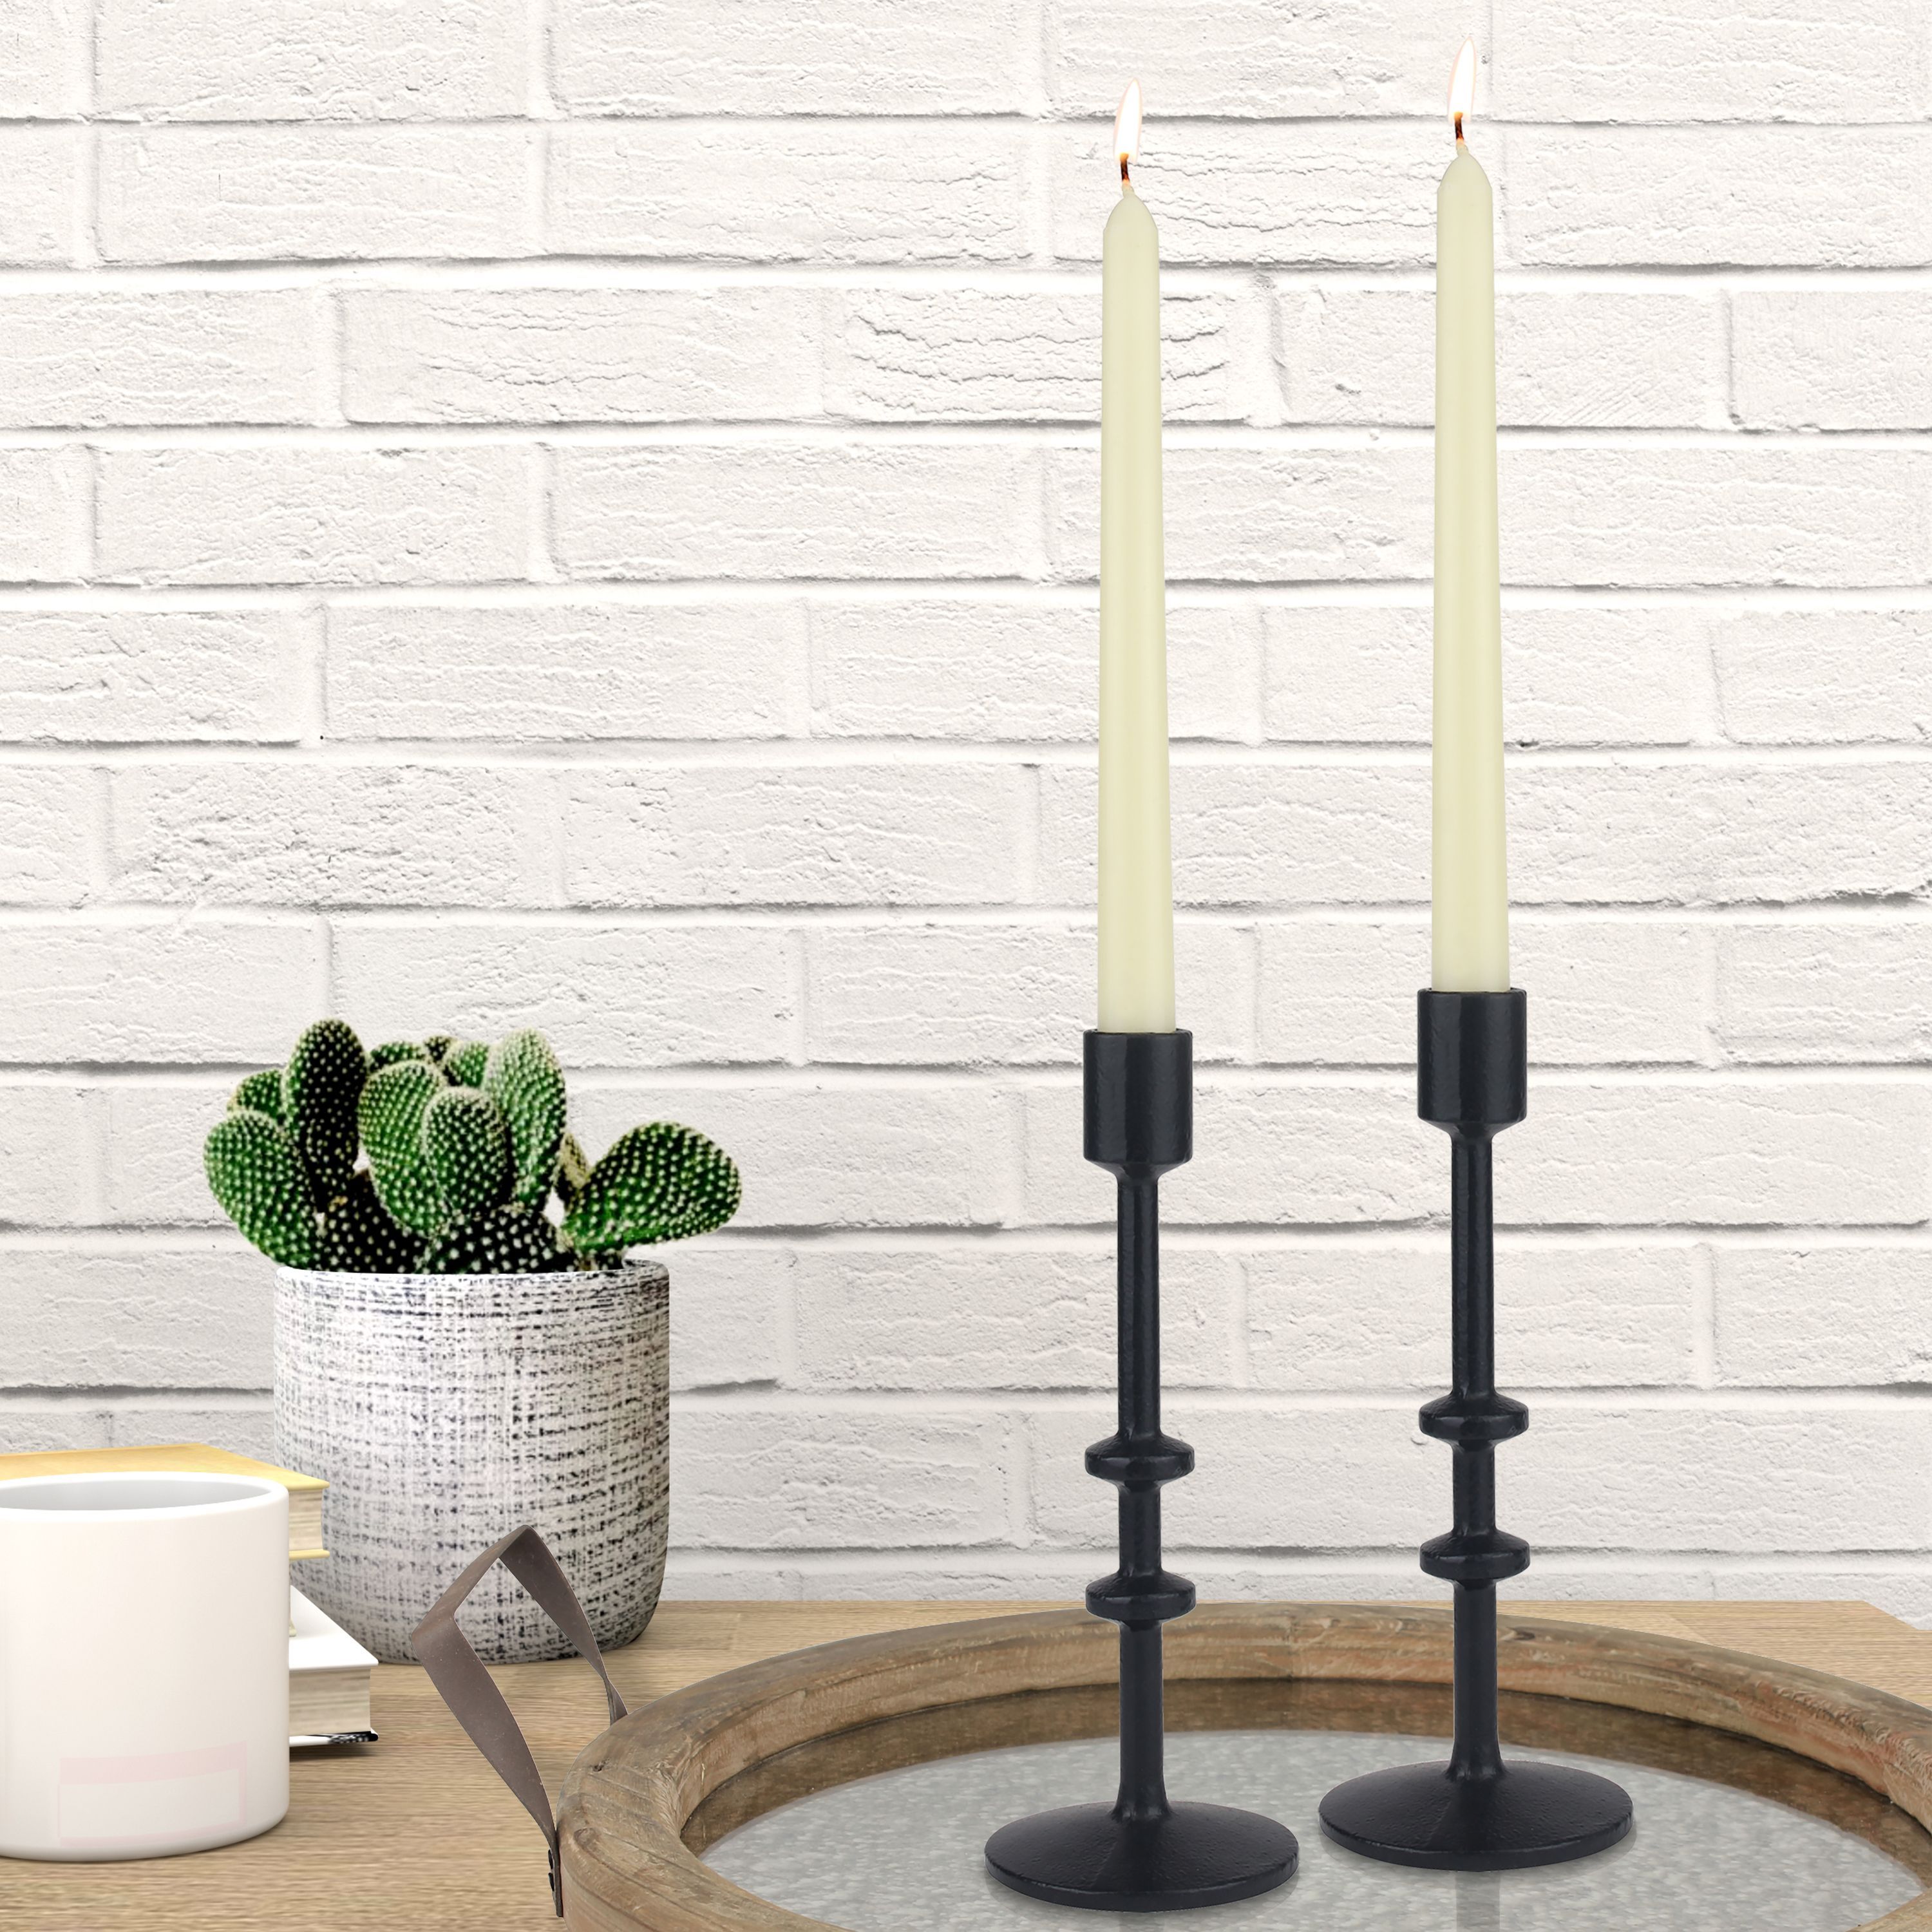 Stonebriar Table Top 9" Traditional Cast Iron Candlestick Holder Set, Black, 2 Pieces | Walmart (US)